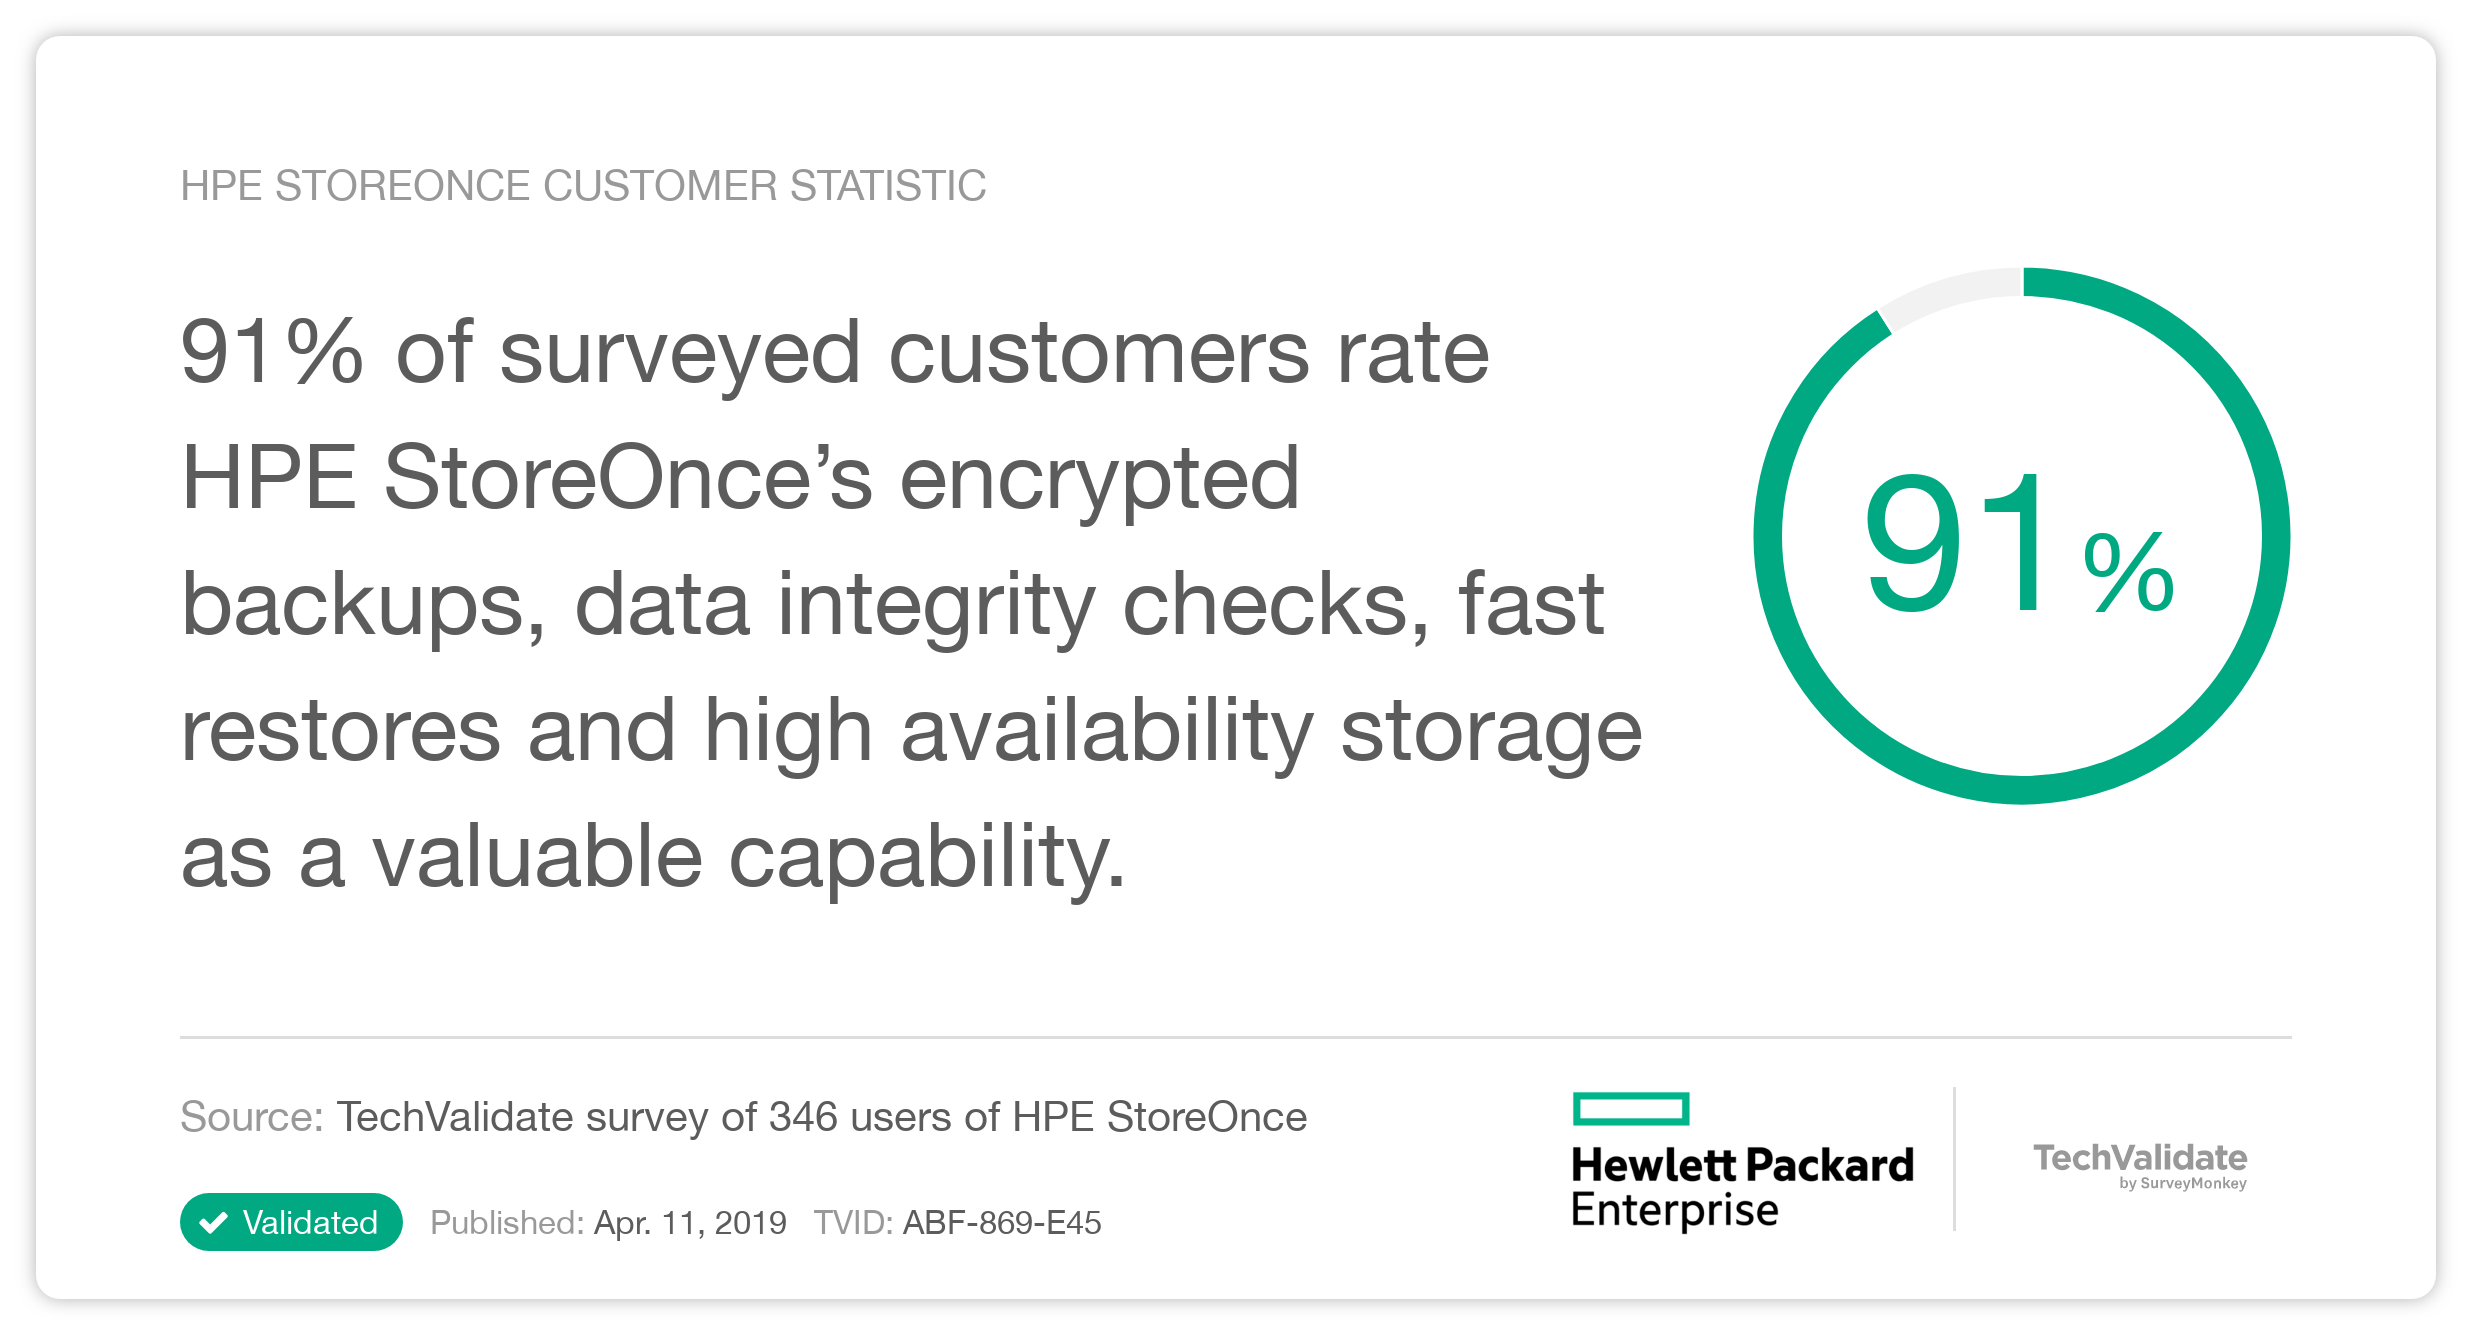 HPE StoreOnce Customer Statistic